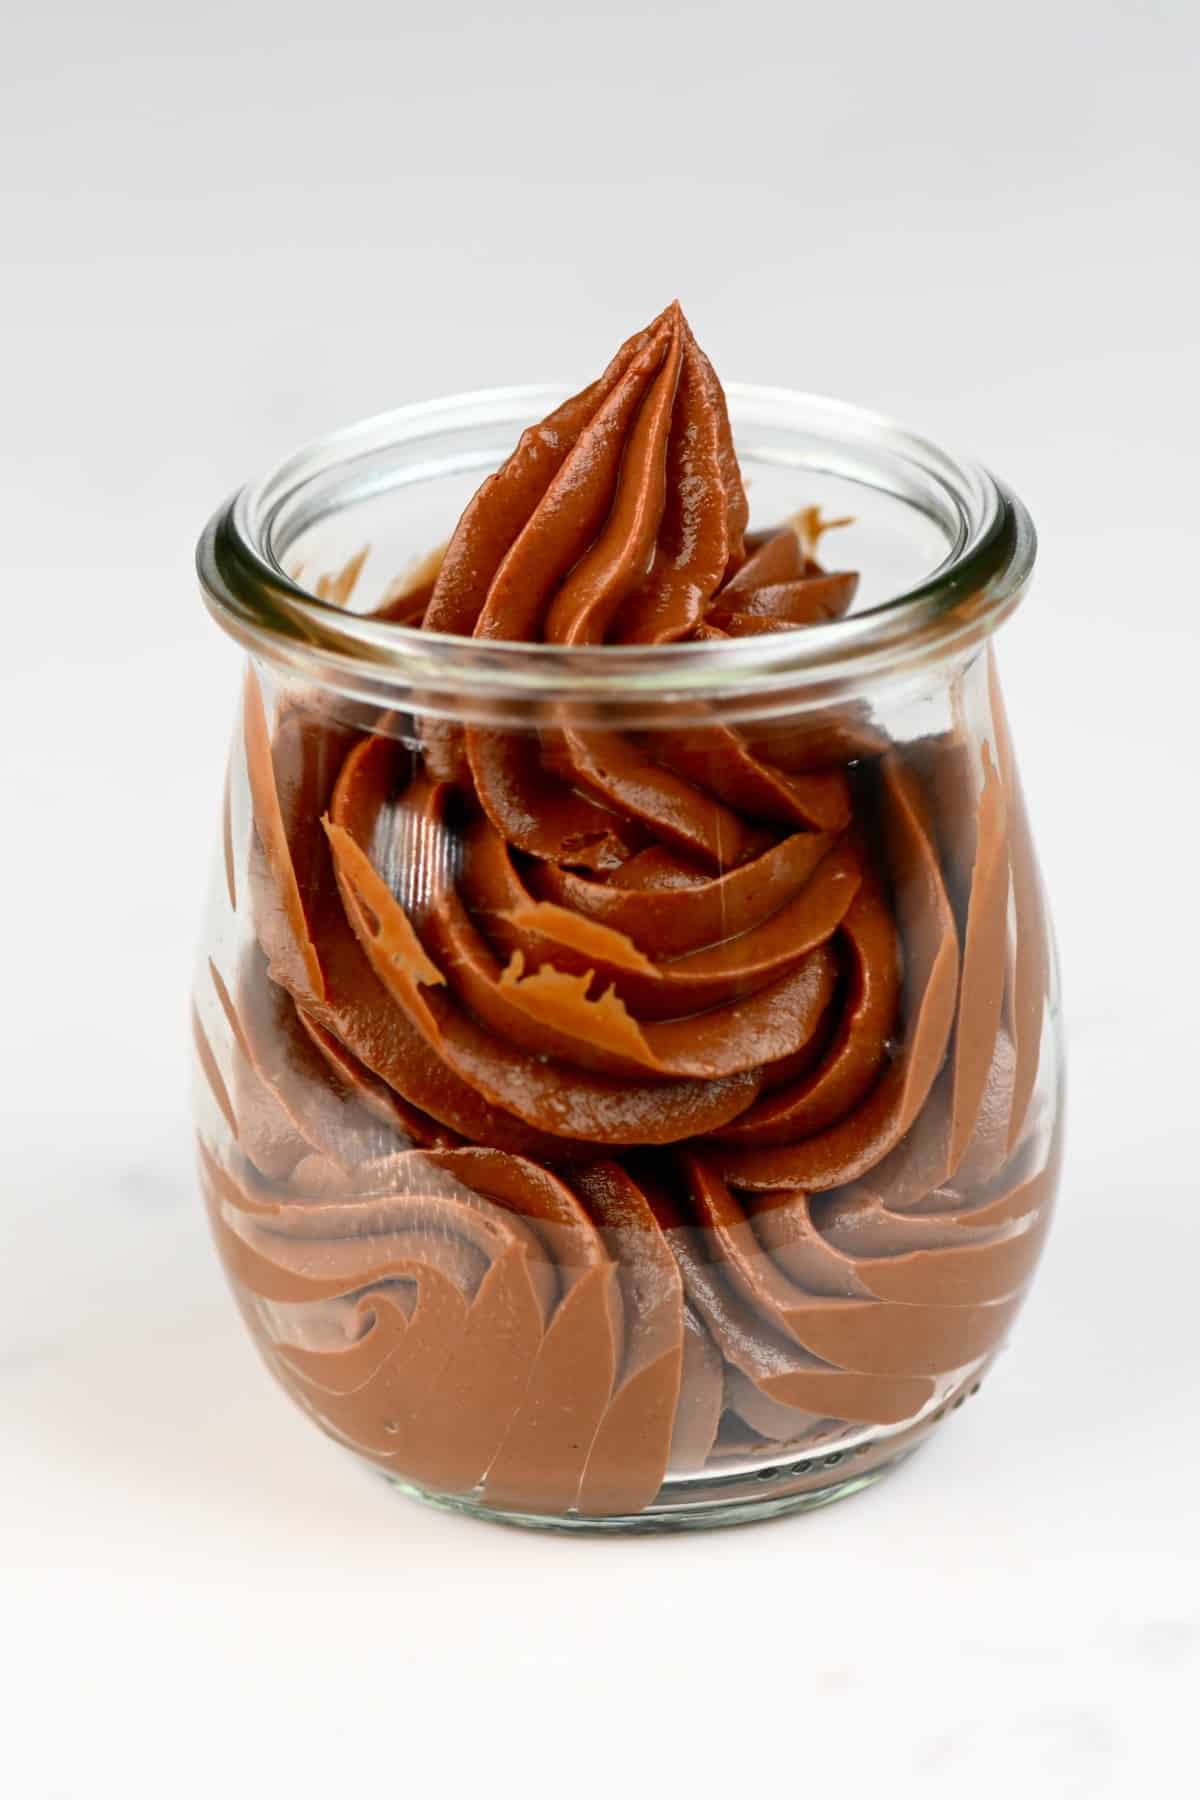 A jar with Chocolate Pastry Cream